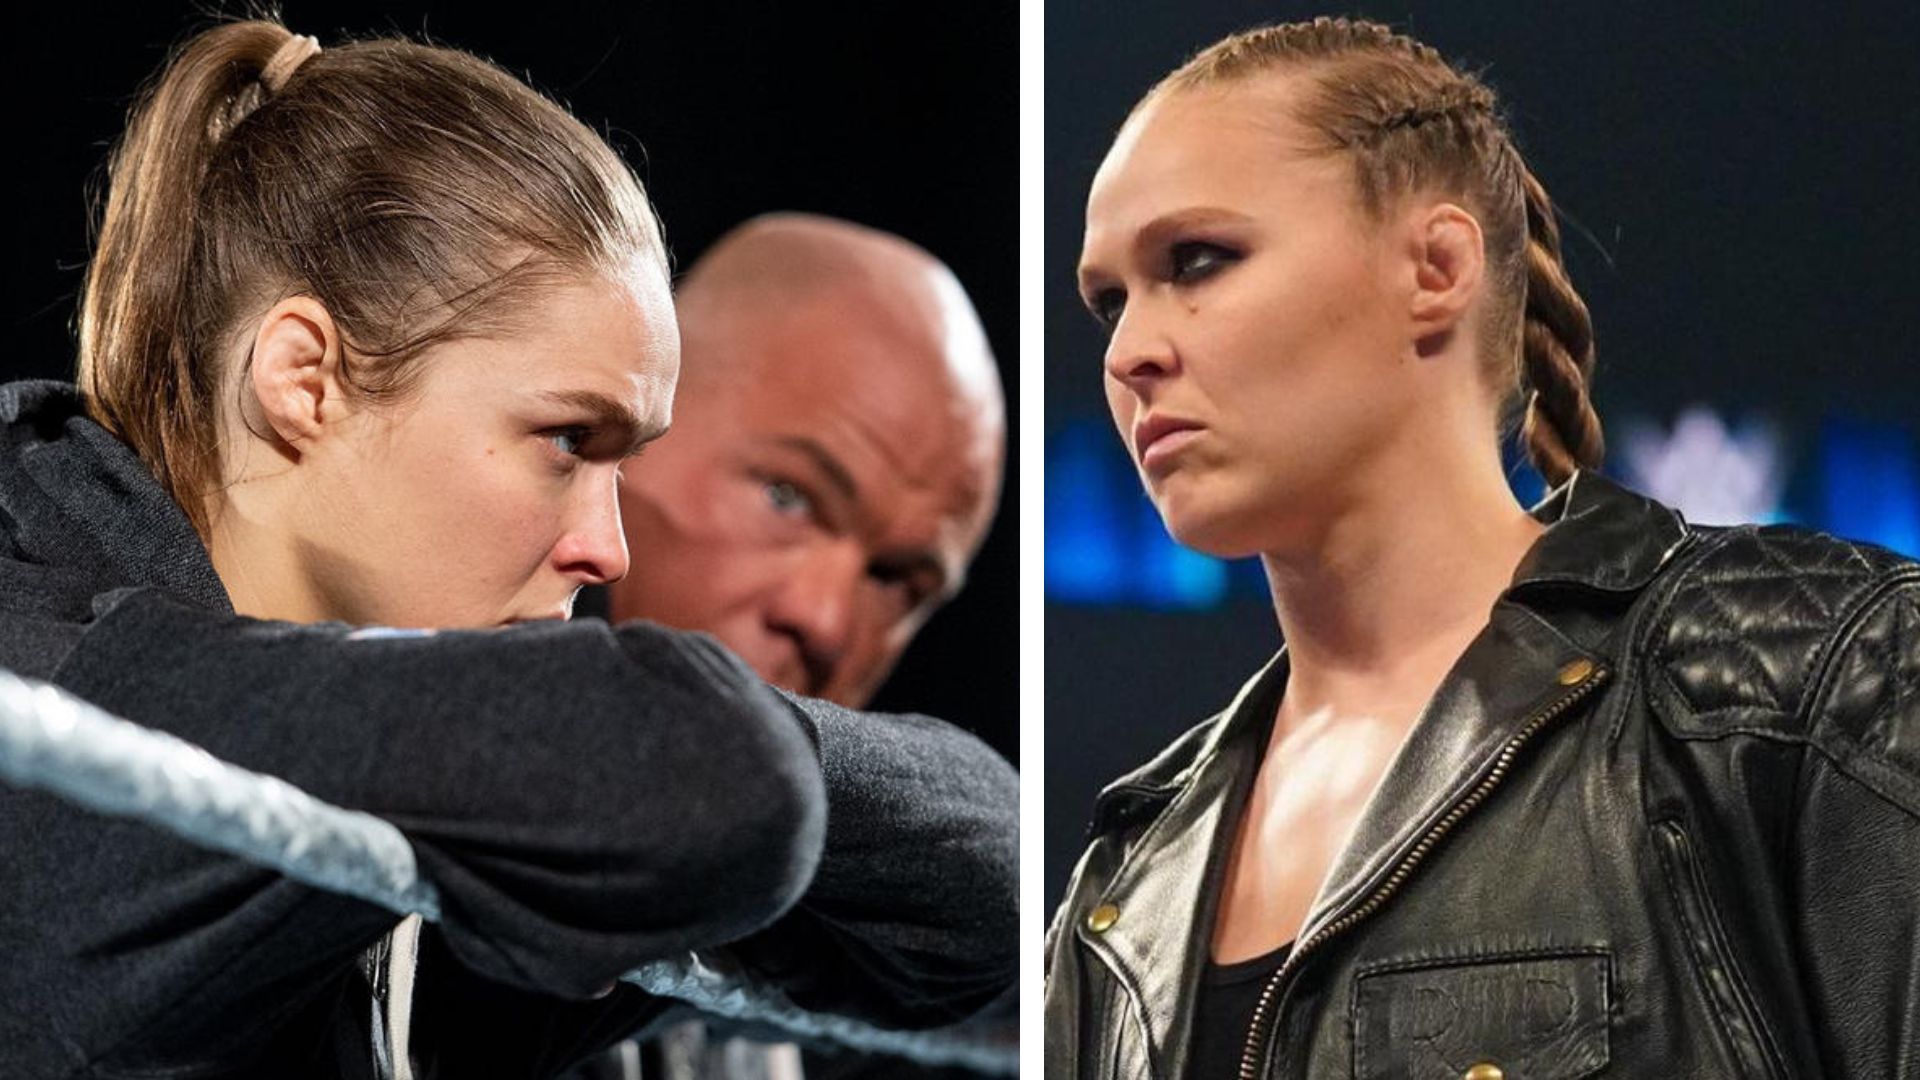 Ronda Rousey had some exciting moments in WWE